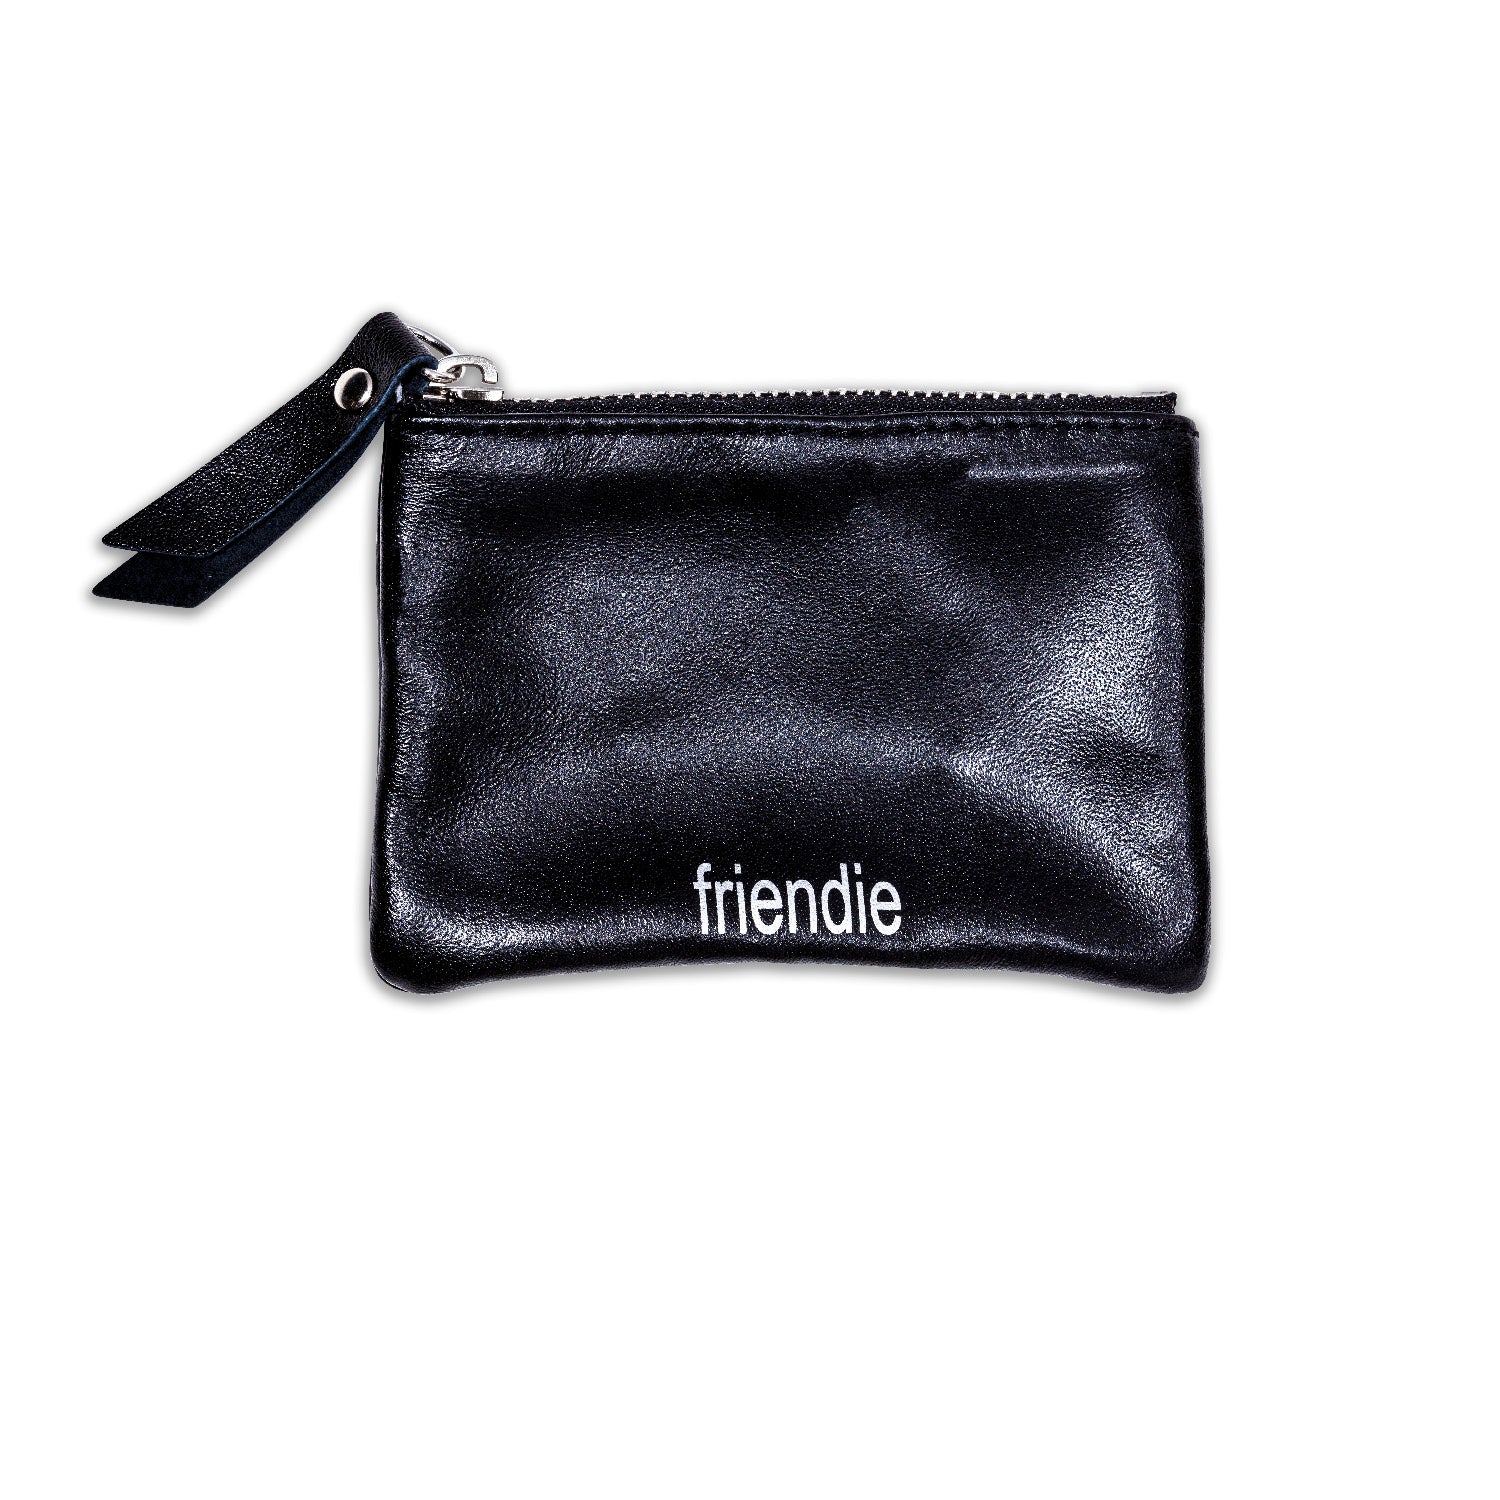 Friendie Black Leather Pouch (Small)